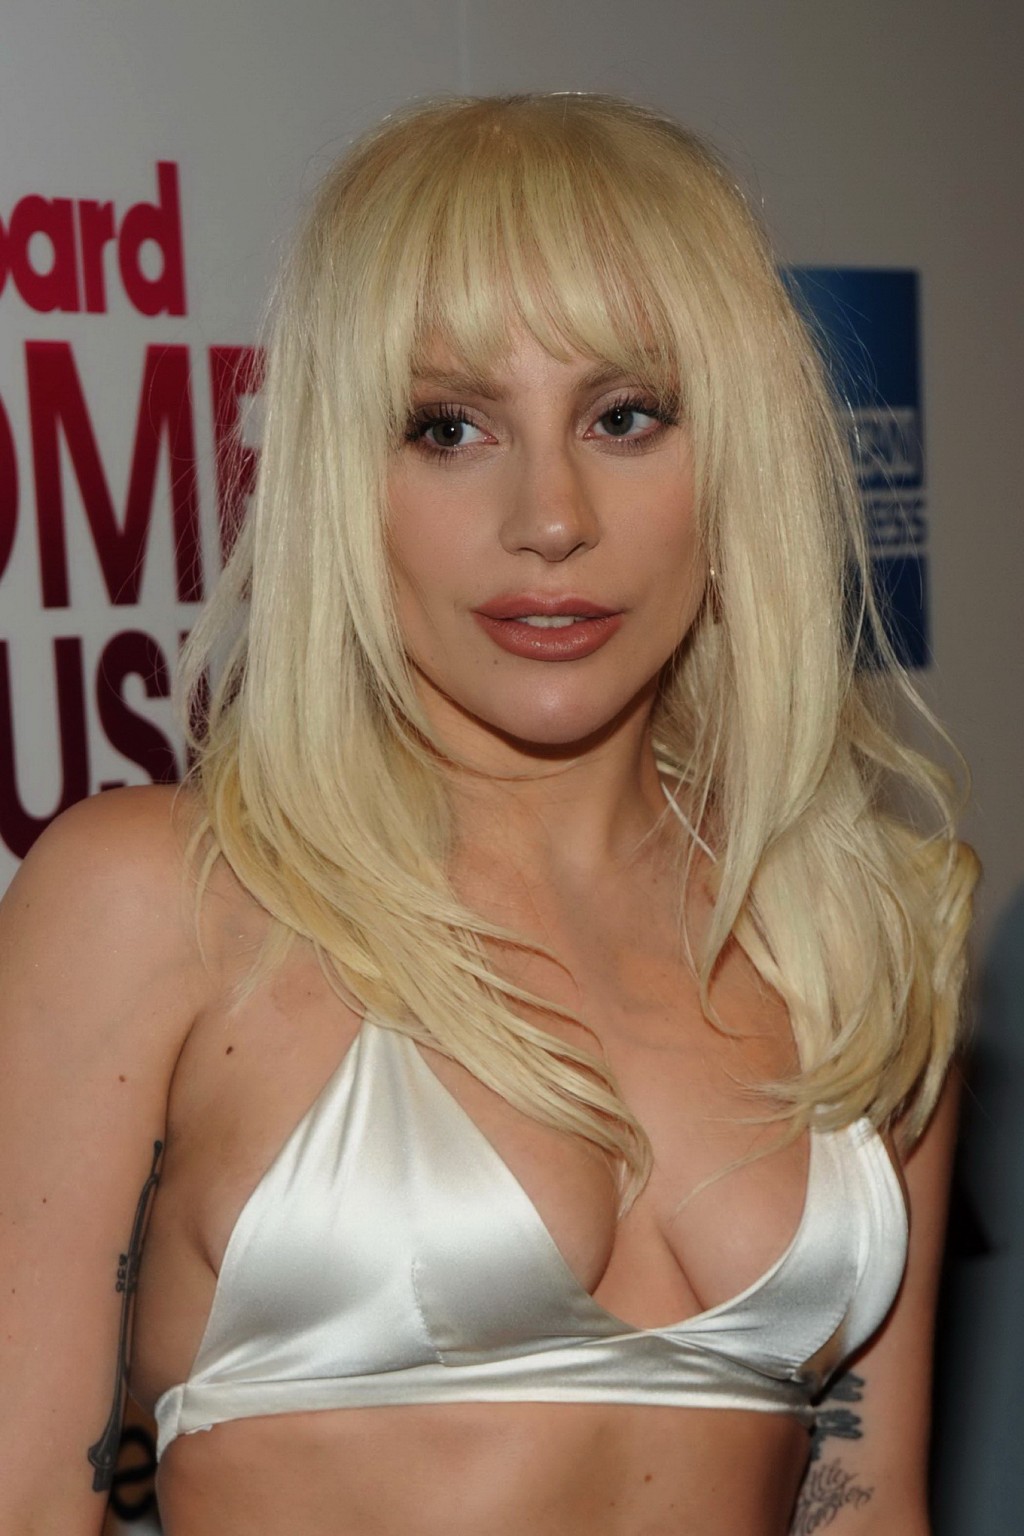 Lady Gaga busty in tiny white bra and skirt in public